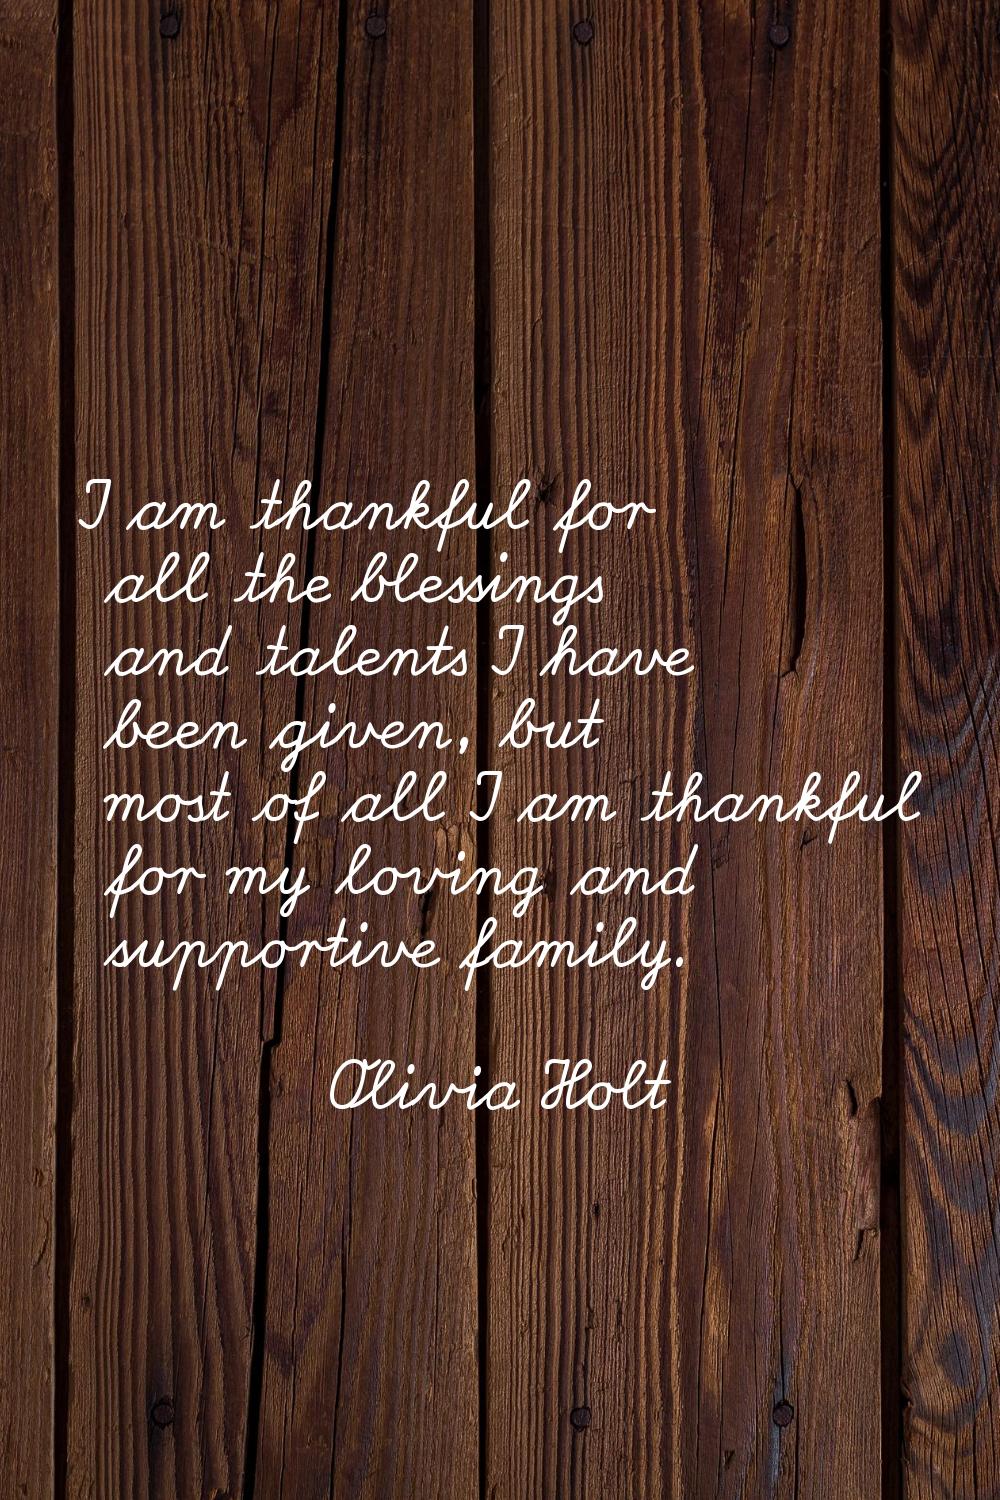 I am thankful for all the blessings and talents I have been given, but most of all I am thankful fo